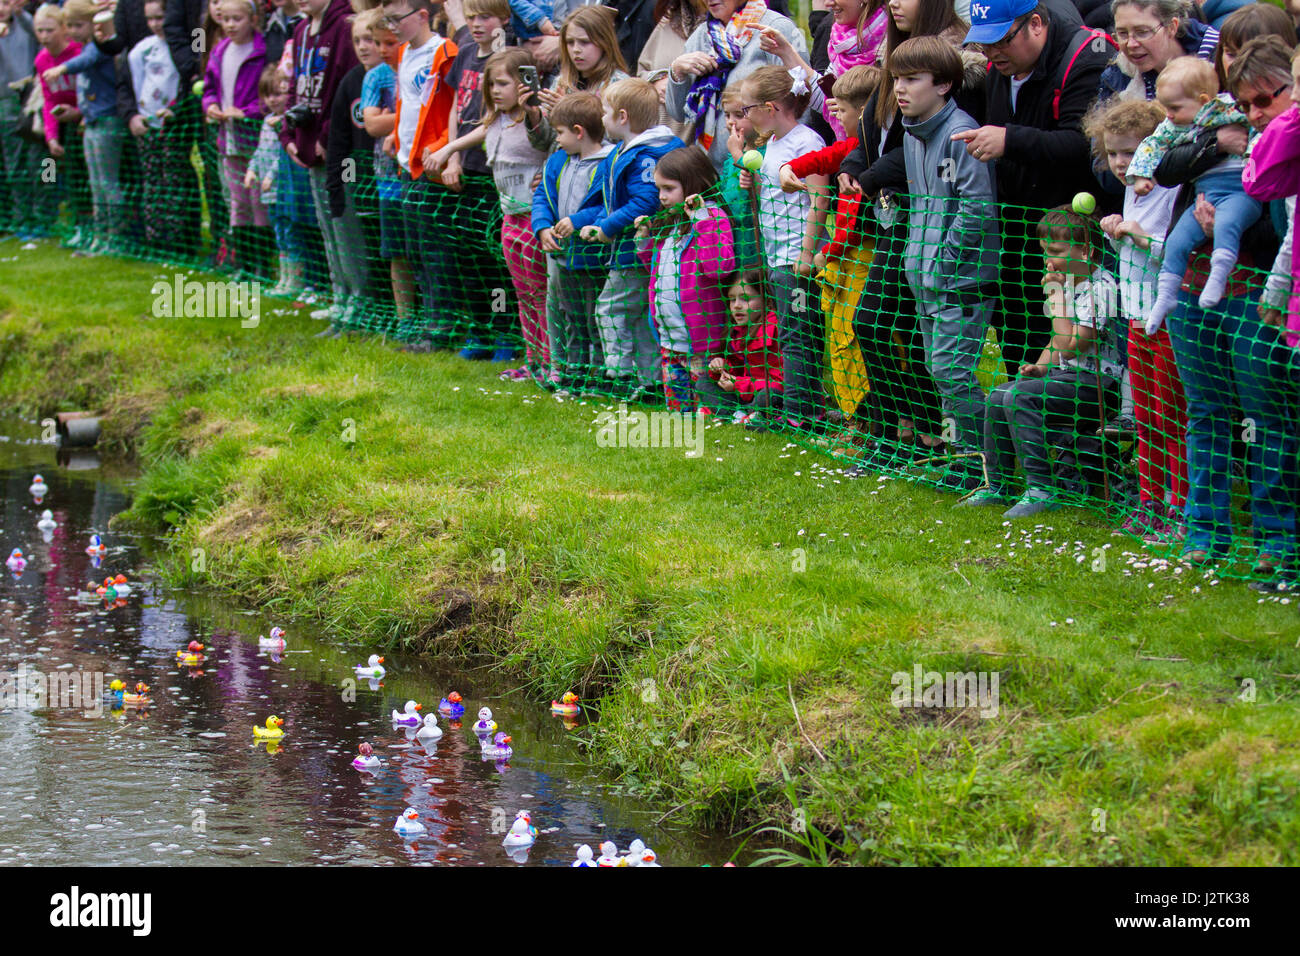 Bank Holiday crowds at a plastic duck race in Tarlescough, Nr Southport,  WWT Martin Mere Wetland Centre made a splash this bank holiday weekend with the fourth annual plastic duck race on MayDay. Children, and Mums & Dads, came in droves to paint a plastic duck to enter into the popular duck race over the bank holiday.  There were 200 ducks taking part in the race, a variety of colours and designs with the crowds going quackers as the sluice gate was opened to start the race. Credit: MediaWorldImages/Alamy Live News Stock Photo